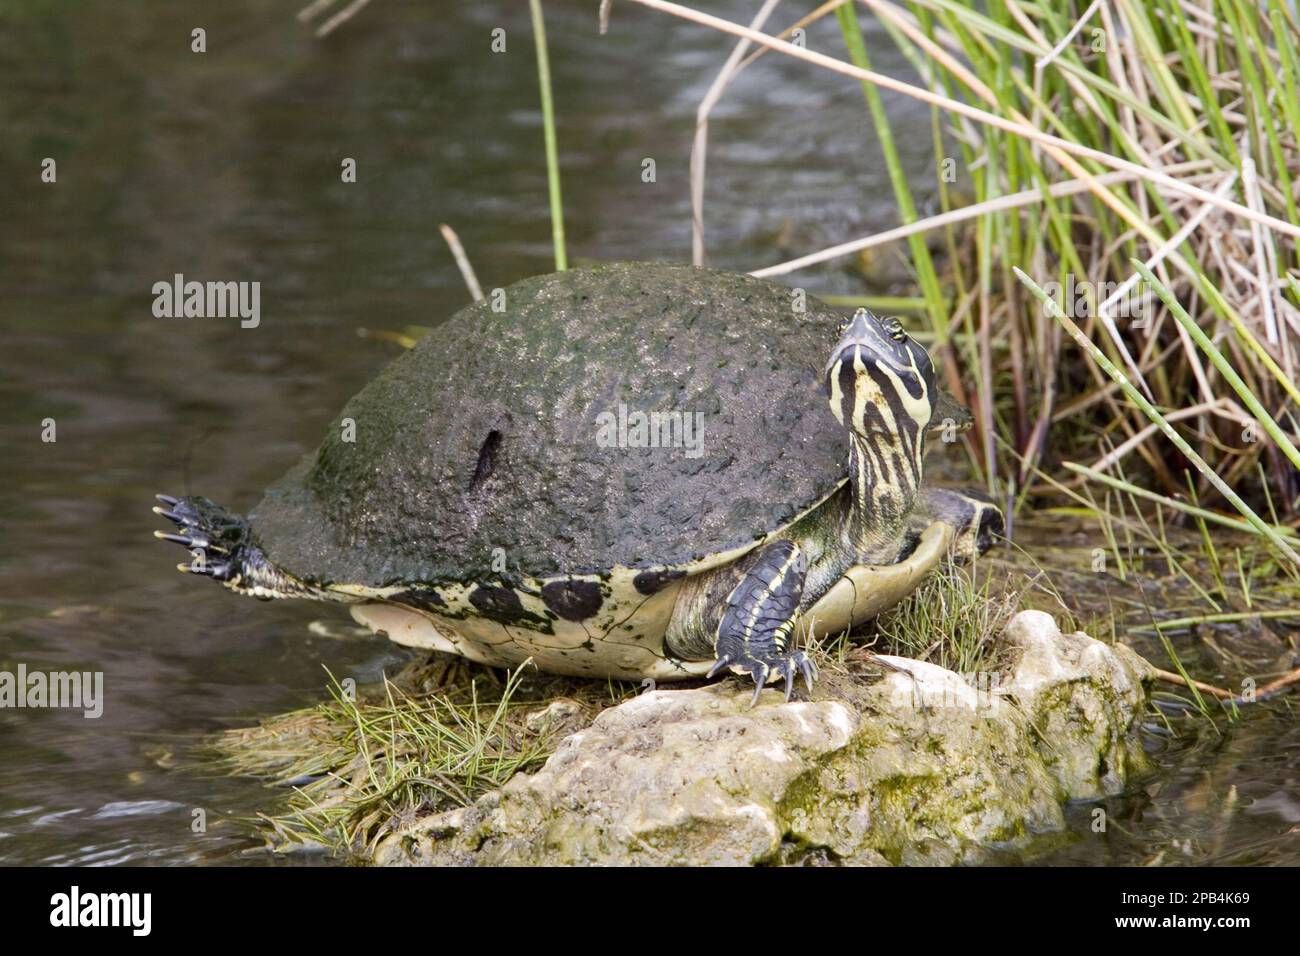 (Pseudemys rubriventris) nelsoni, florida cooter rosso-bellied (Pseudemys nelsoni), tartarughe ornamentali rosso-bellied, tartarughe ornamentali rosso-bellied Foto Stock